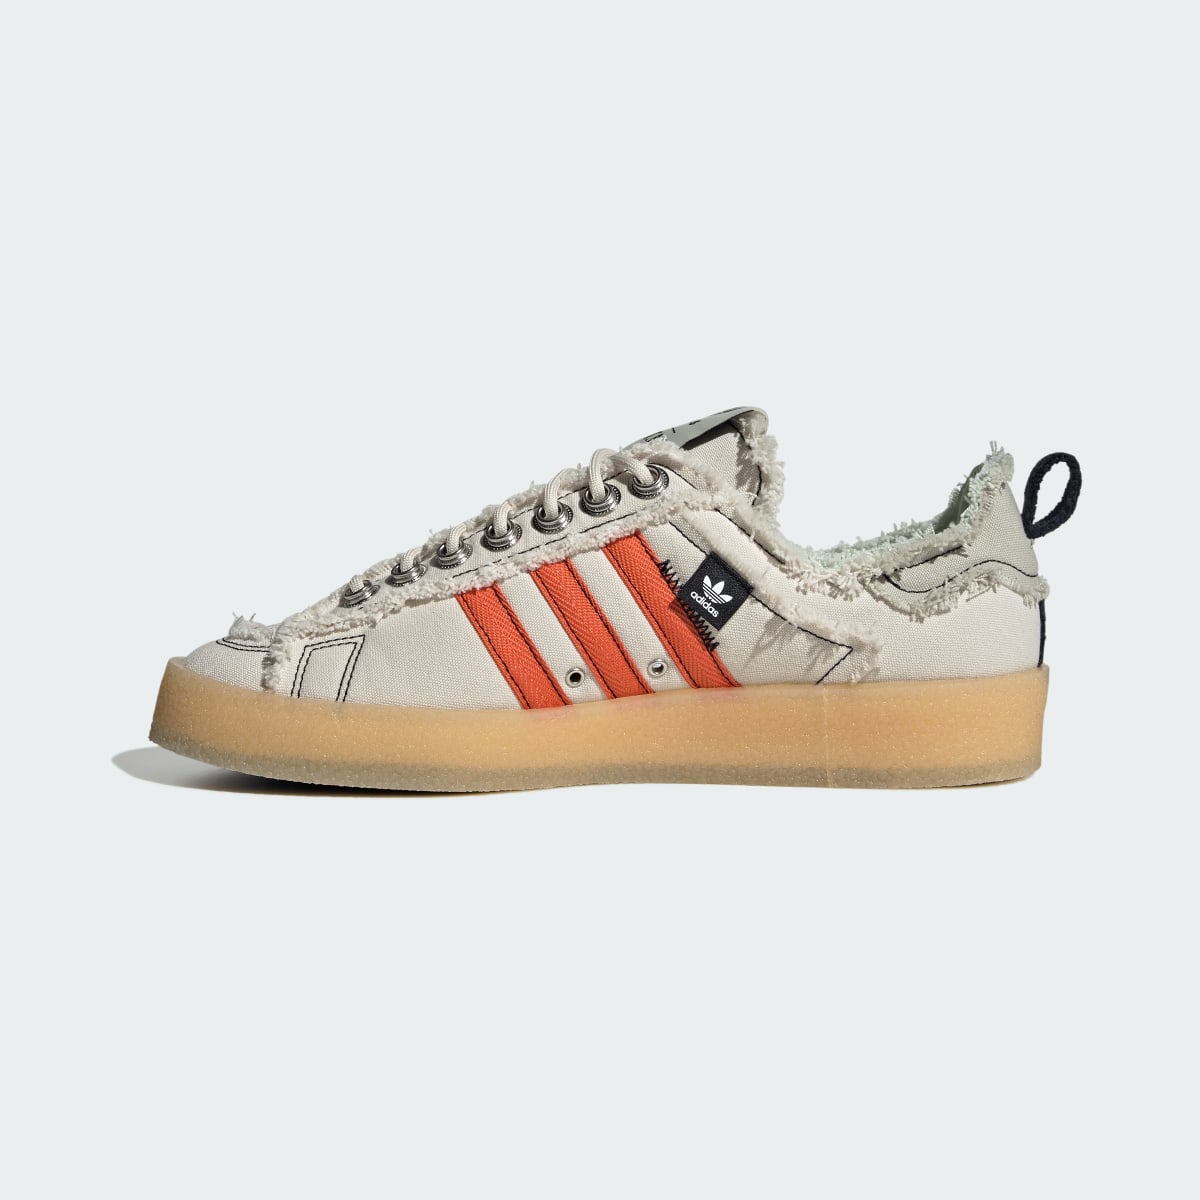 Adidas Campus 80s Shoes. 8